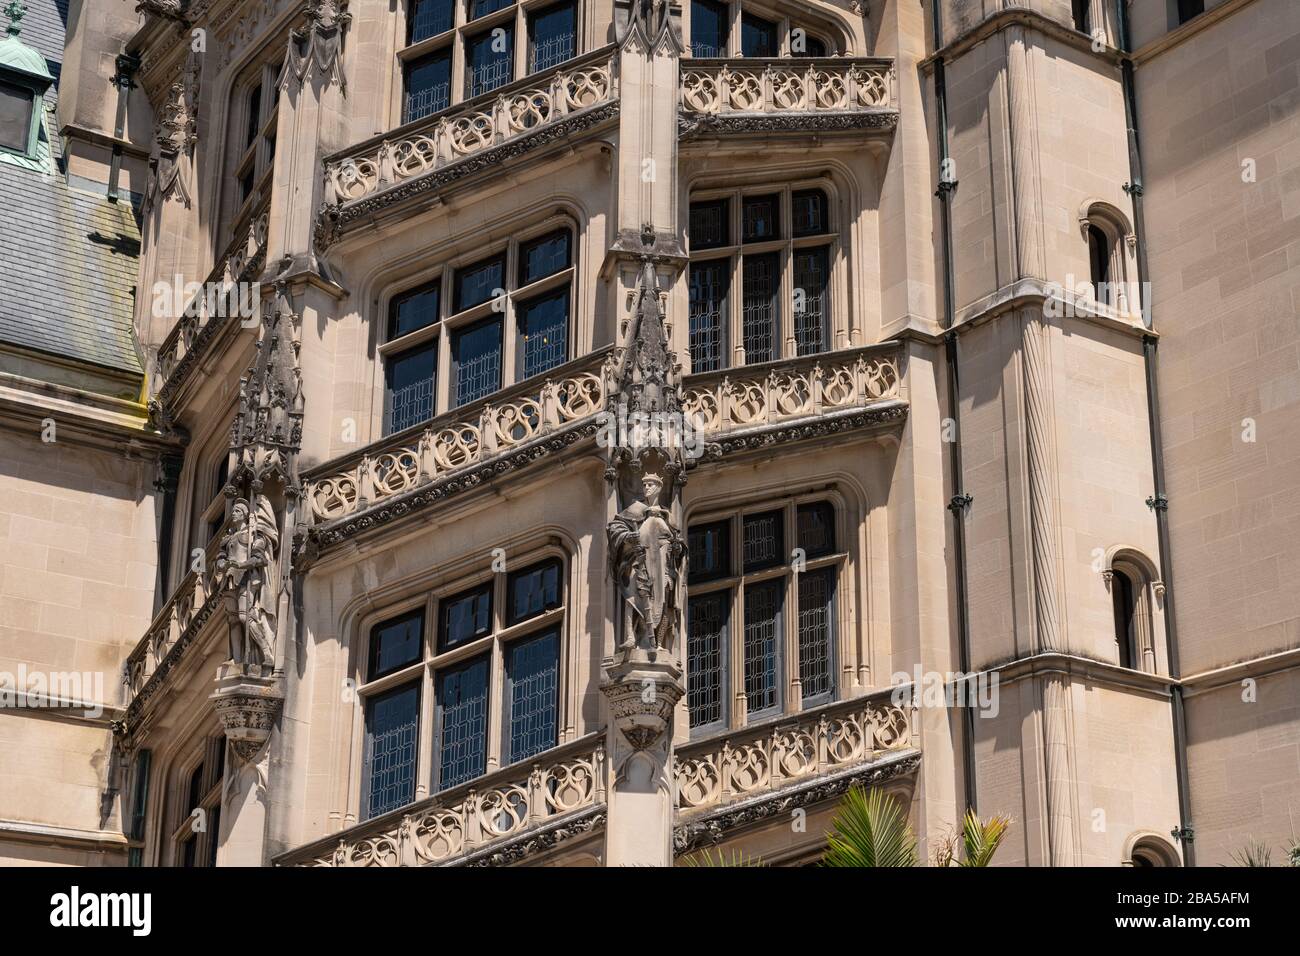 Asheville, North Carolina - July 24, 2019 - Sculptural and architectural details on the façade of the Biltmore Estate. Stock Photo